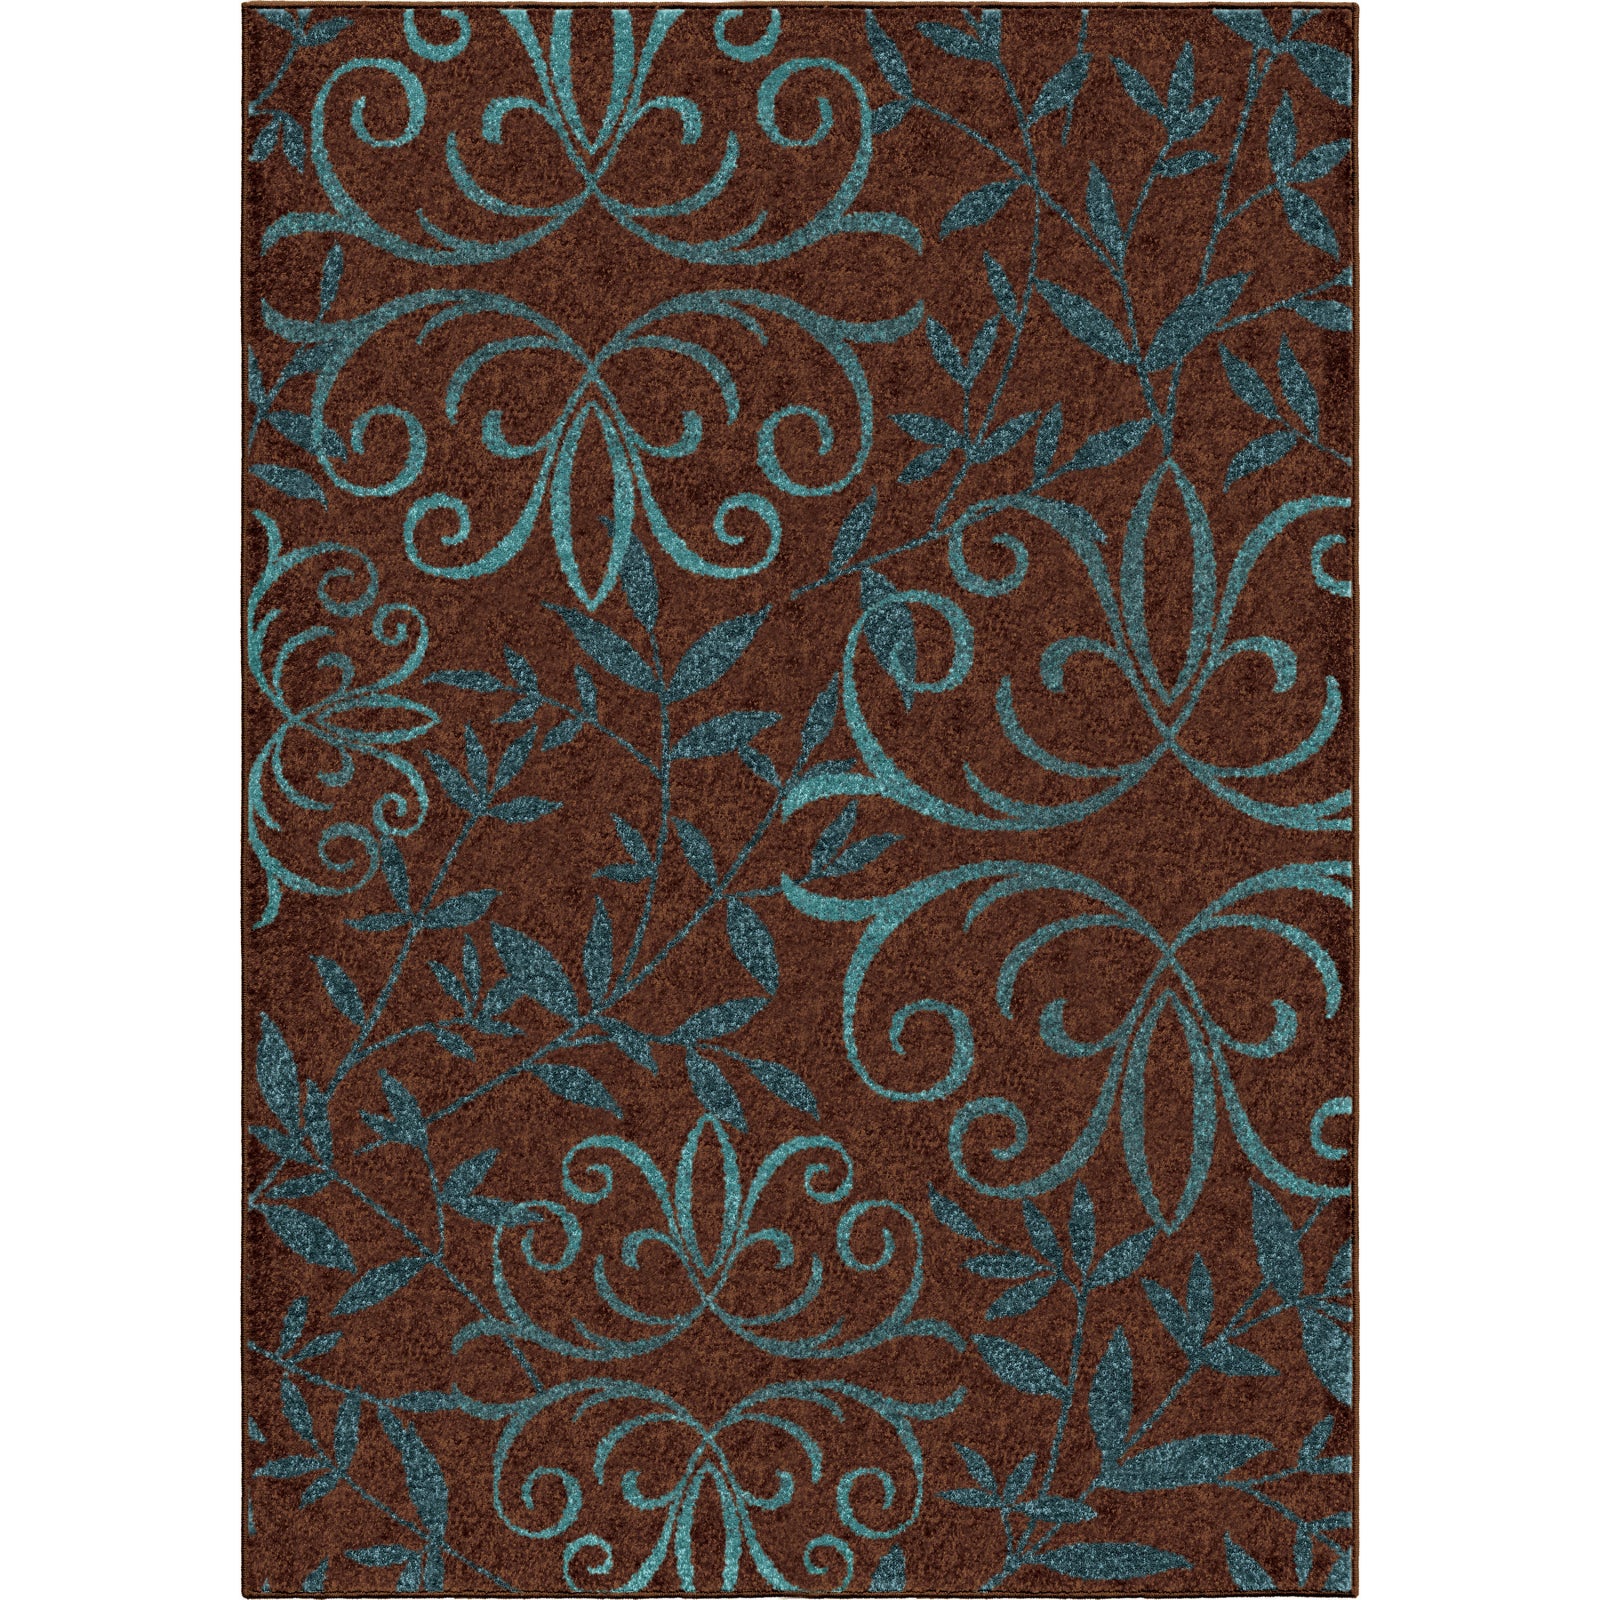 Orian Rugs Promise Voyager Brown Area Rug main image